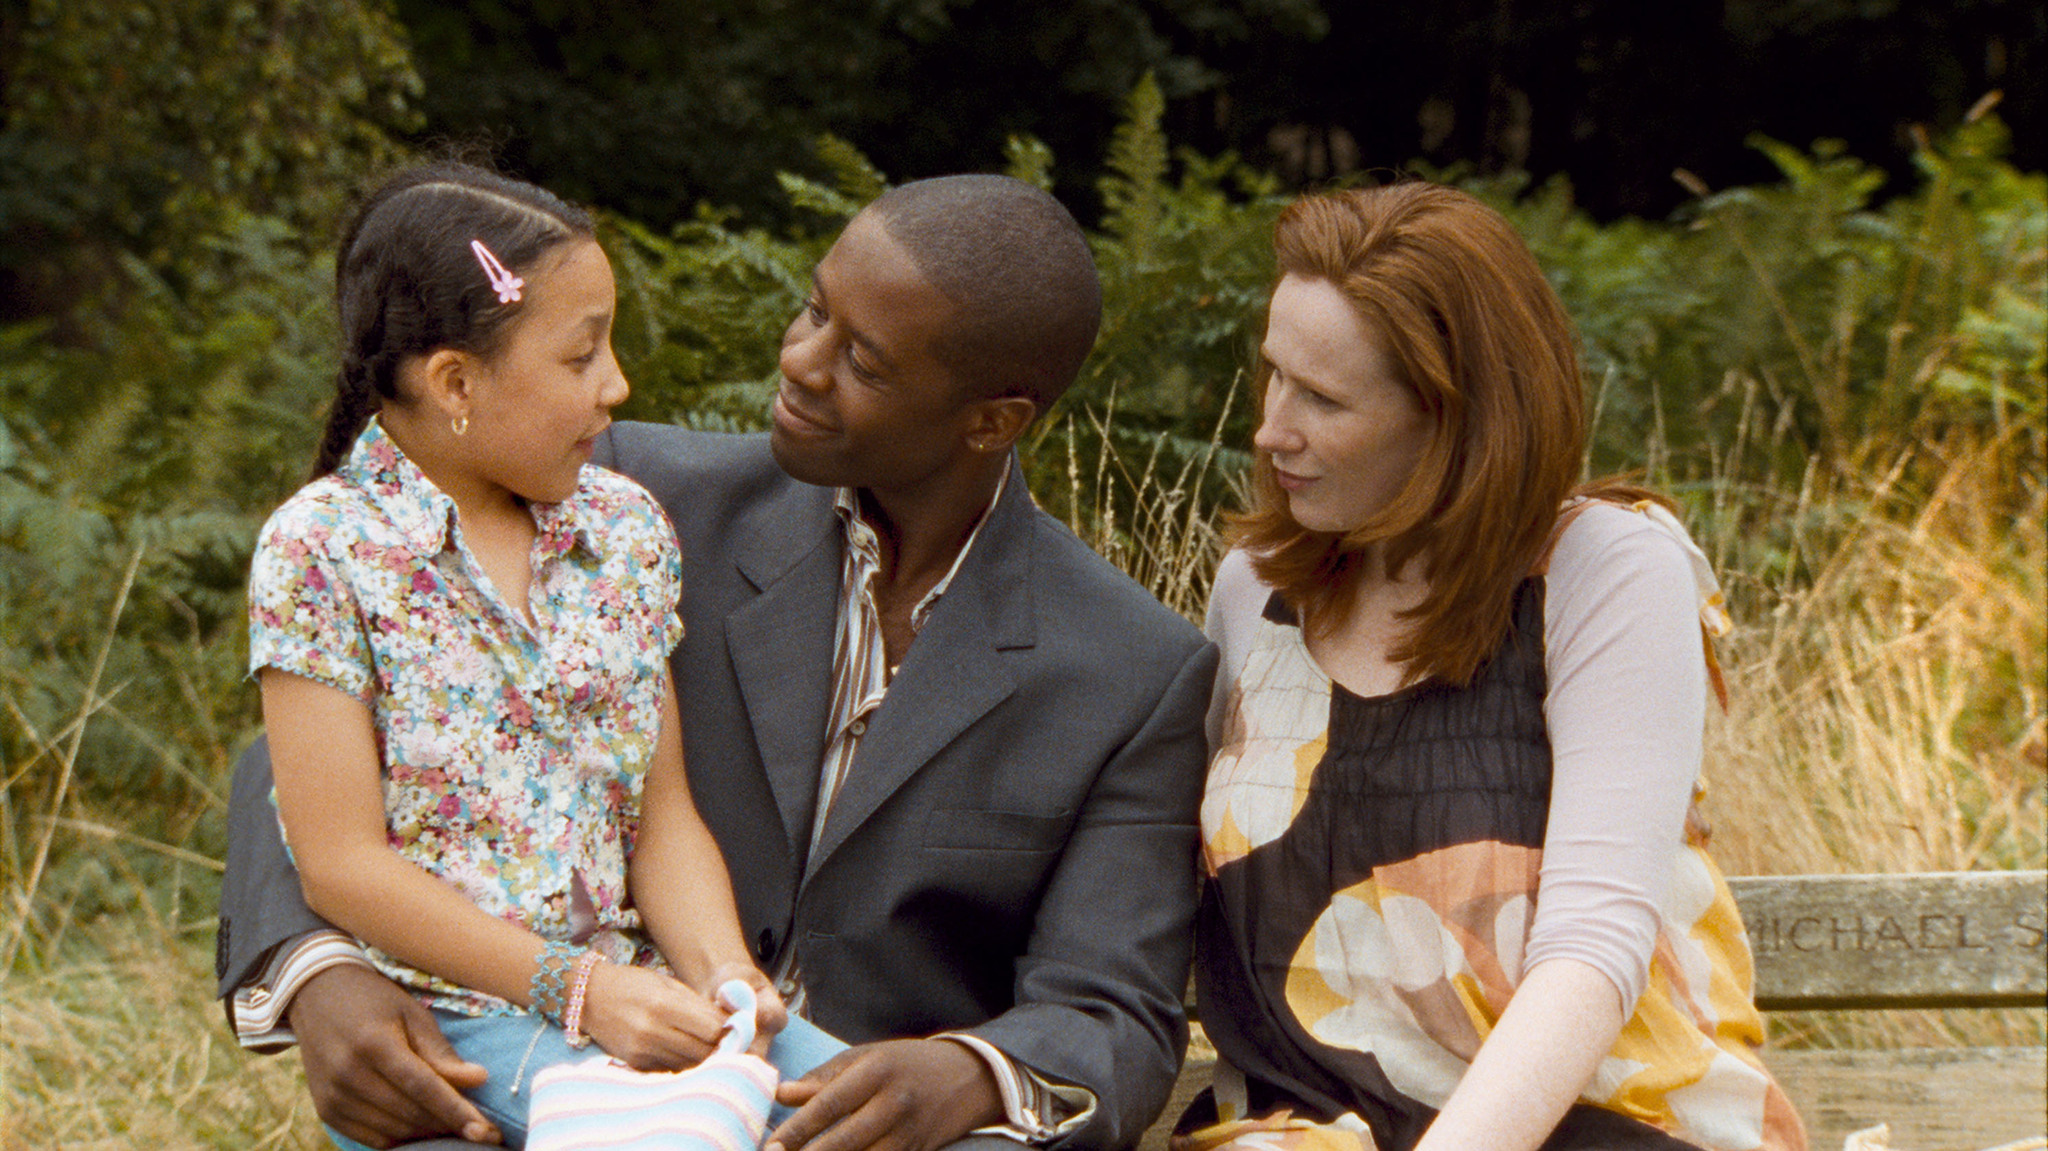 Still of Adrian Lester and Catherine Tate in Scenes of a Sexual Nature (2006)